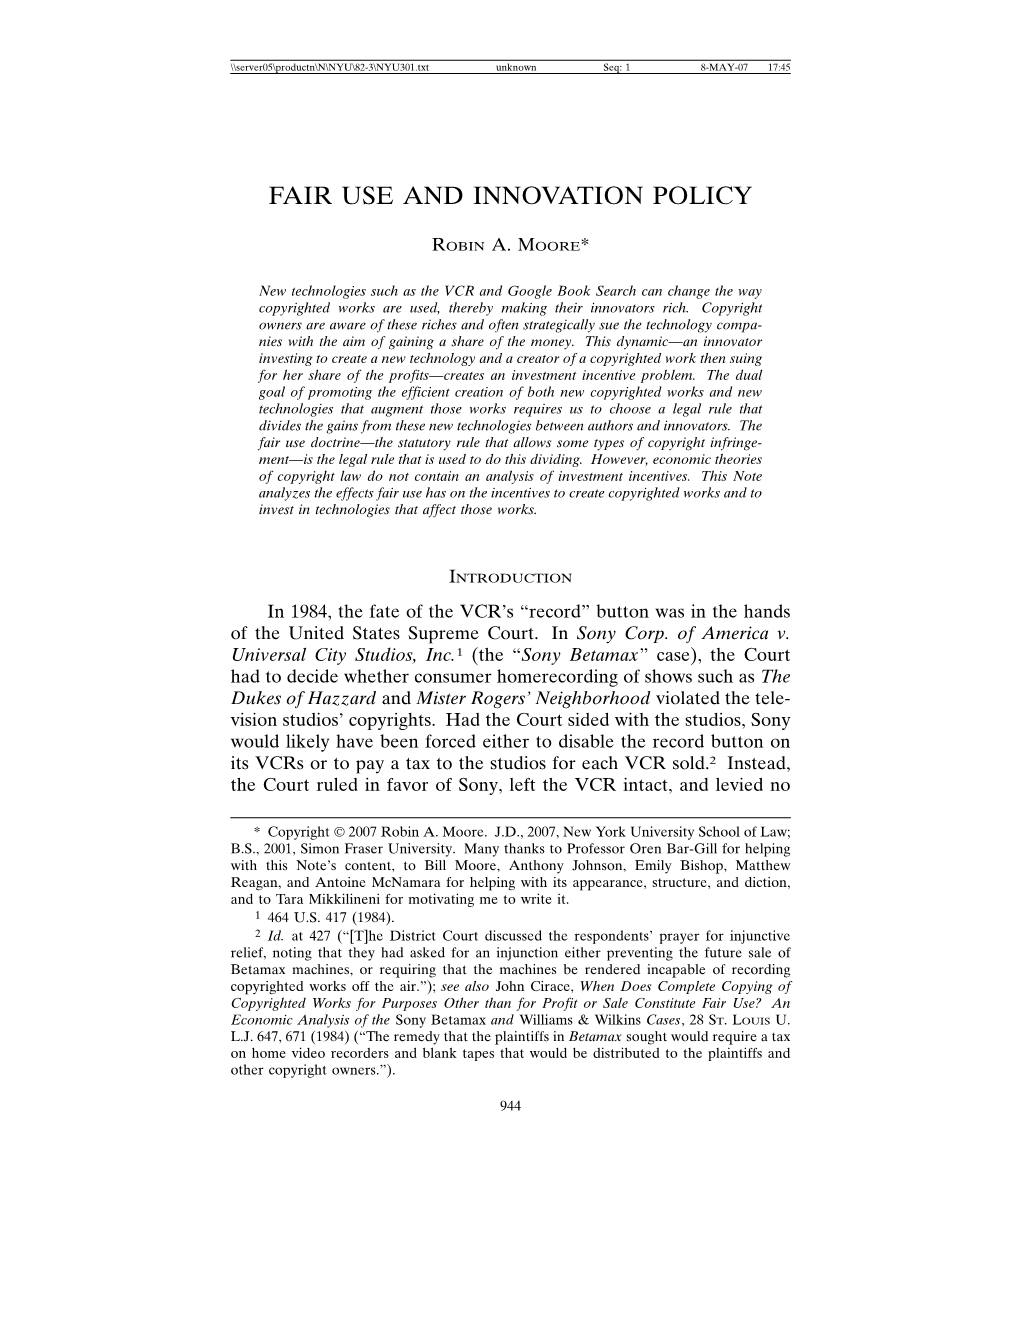 Fair Use and Innovation Policy